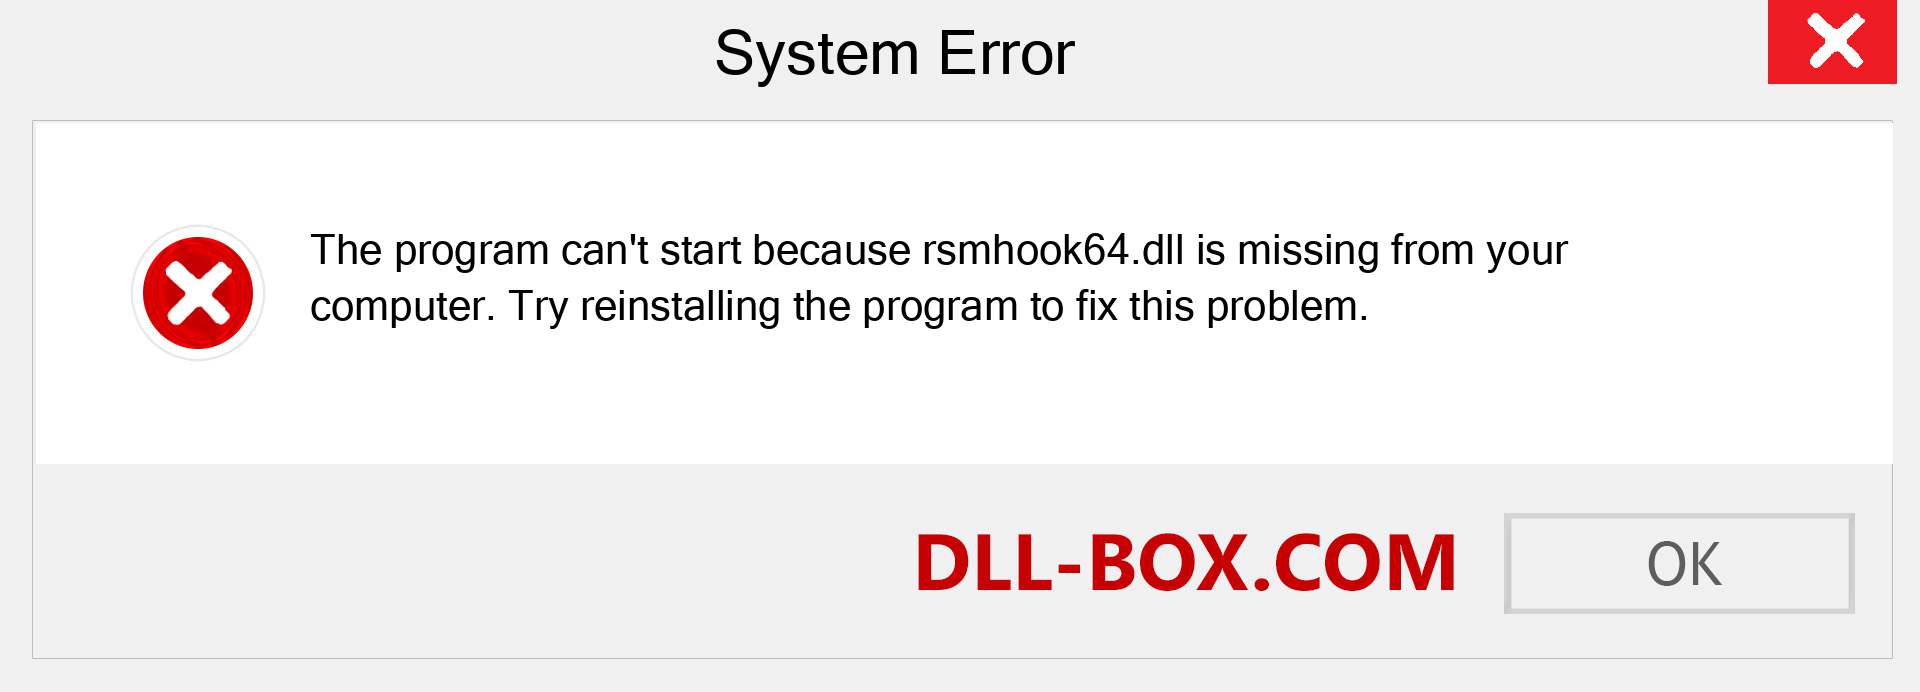  rsmhook64.dll file is missing?. Download for Windows 7, 8, 10 - Fix  rsmhook64 dll Missing Error on Windows, photos, images